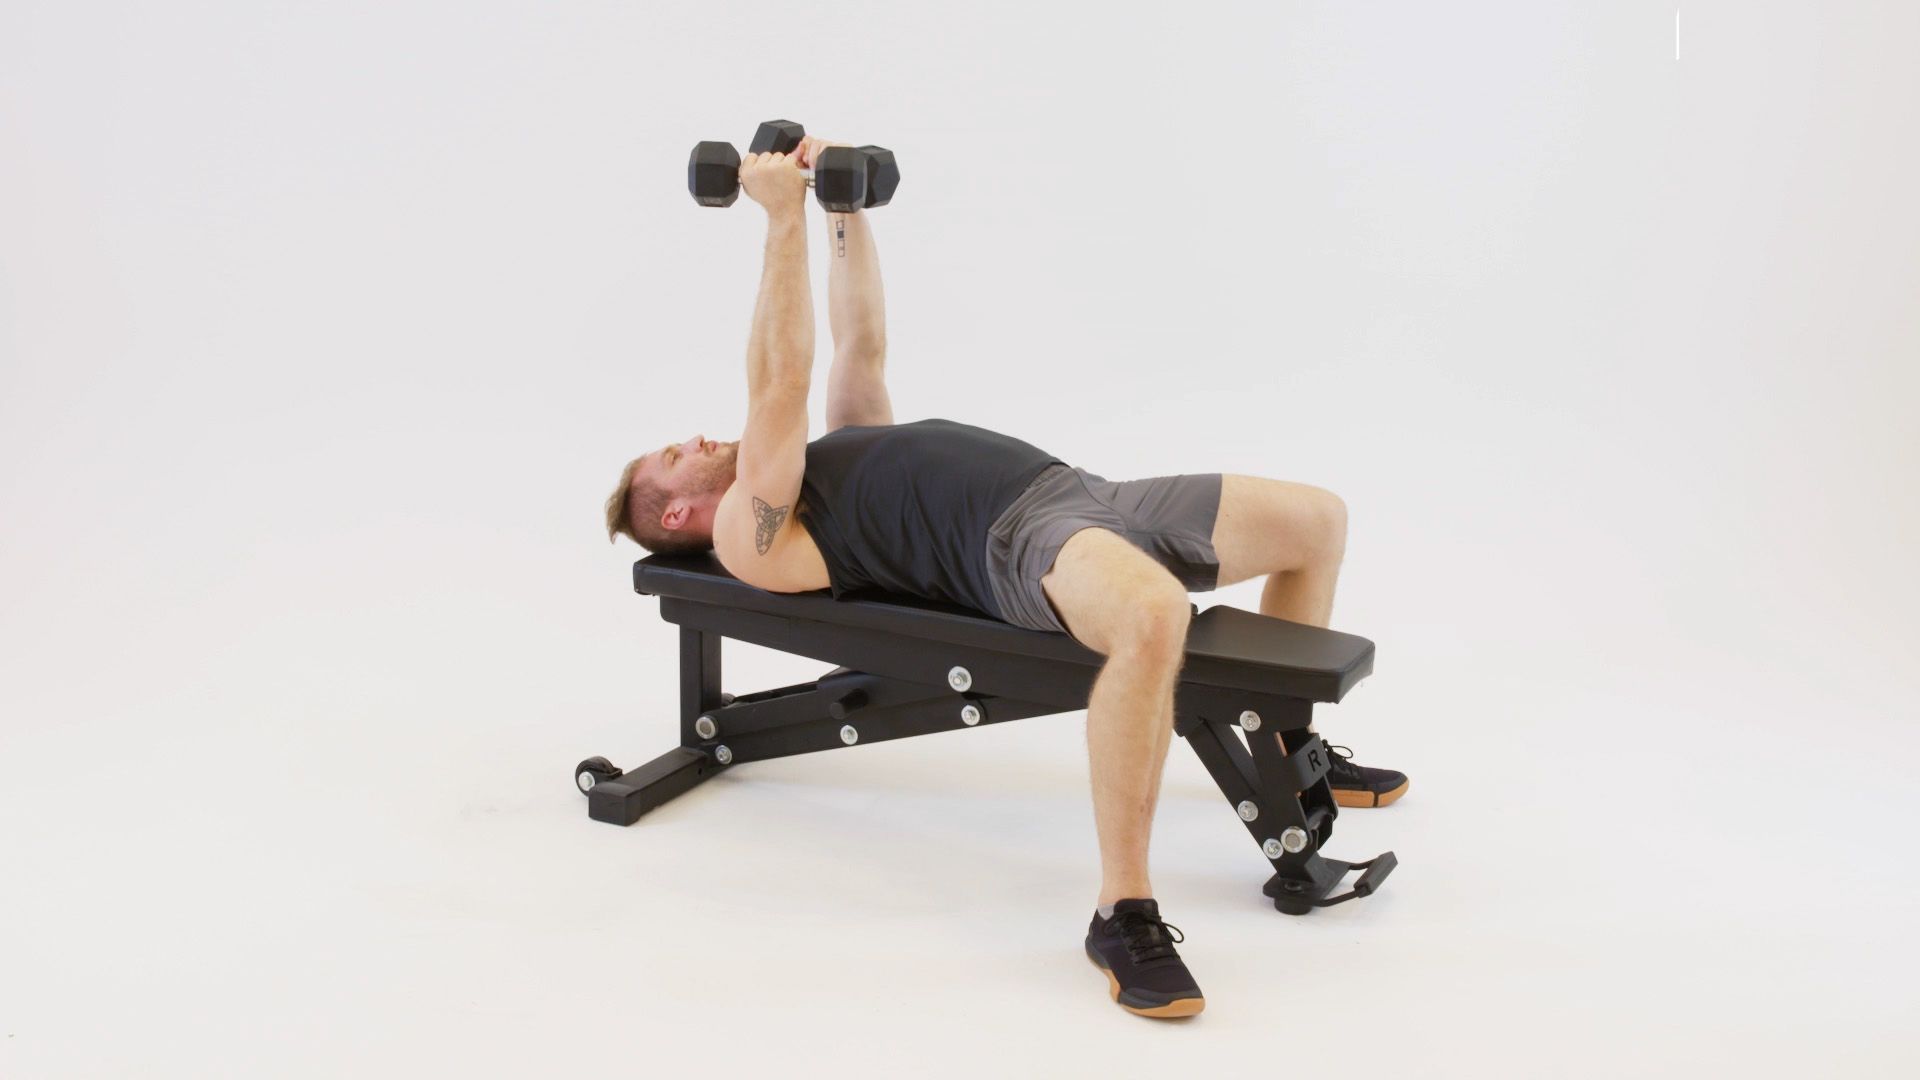 How to Do the Dumbbell Chest Fly Workout to Build Chest Muscle